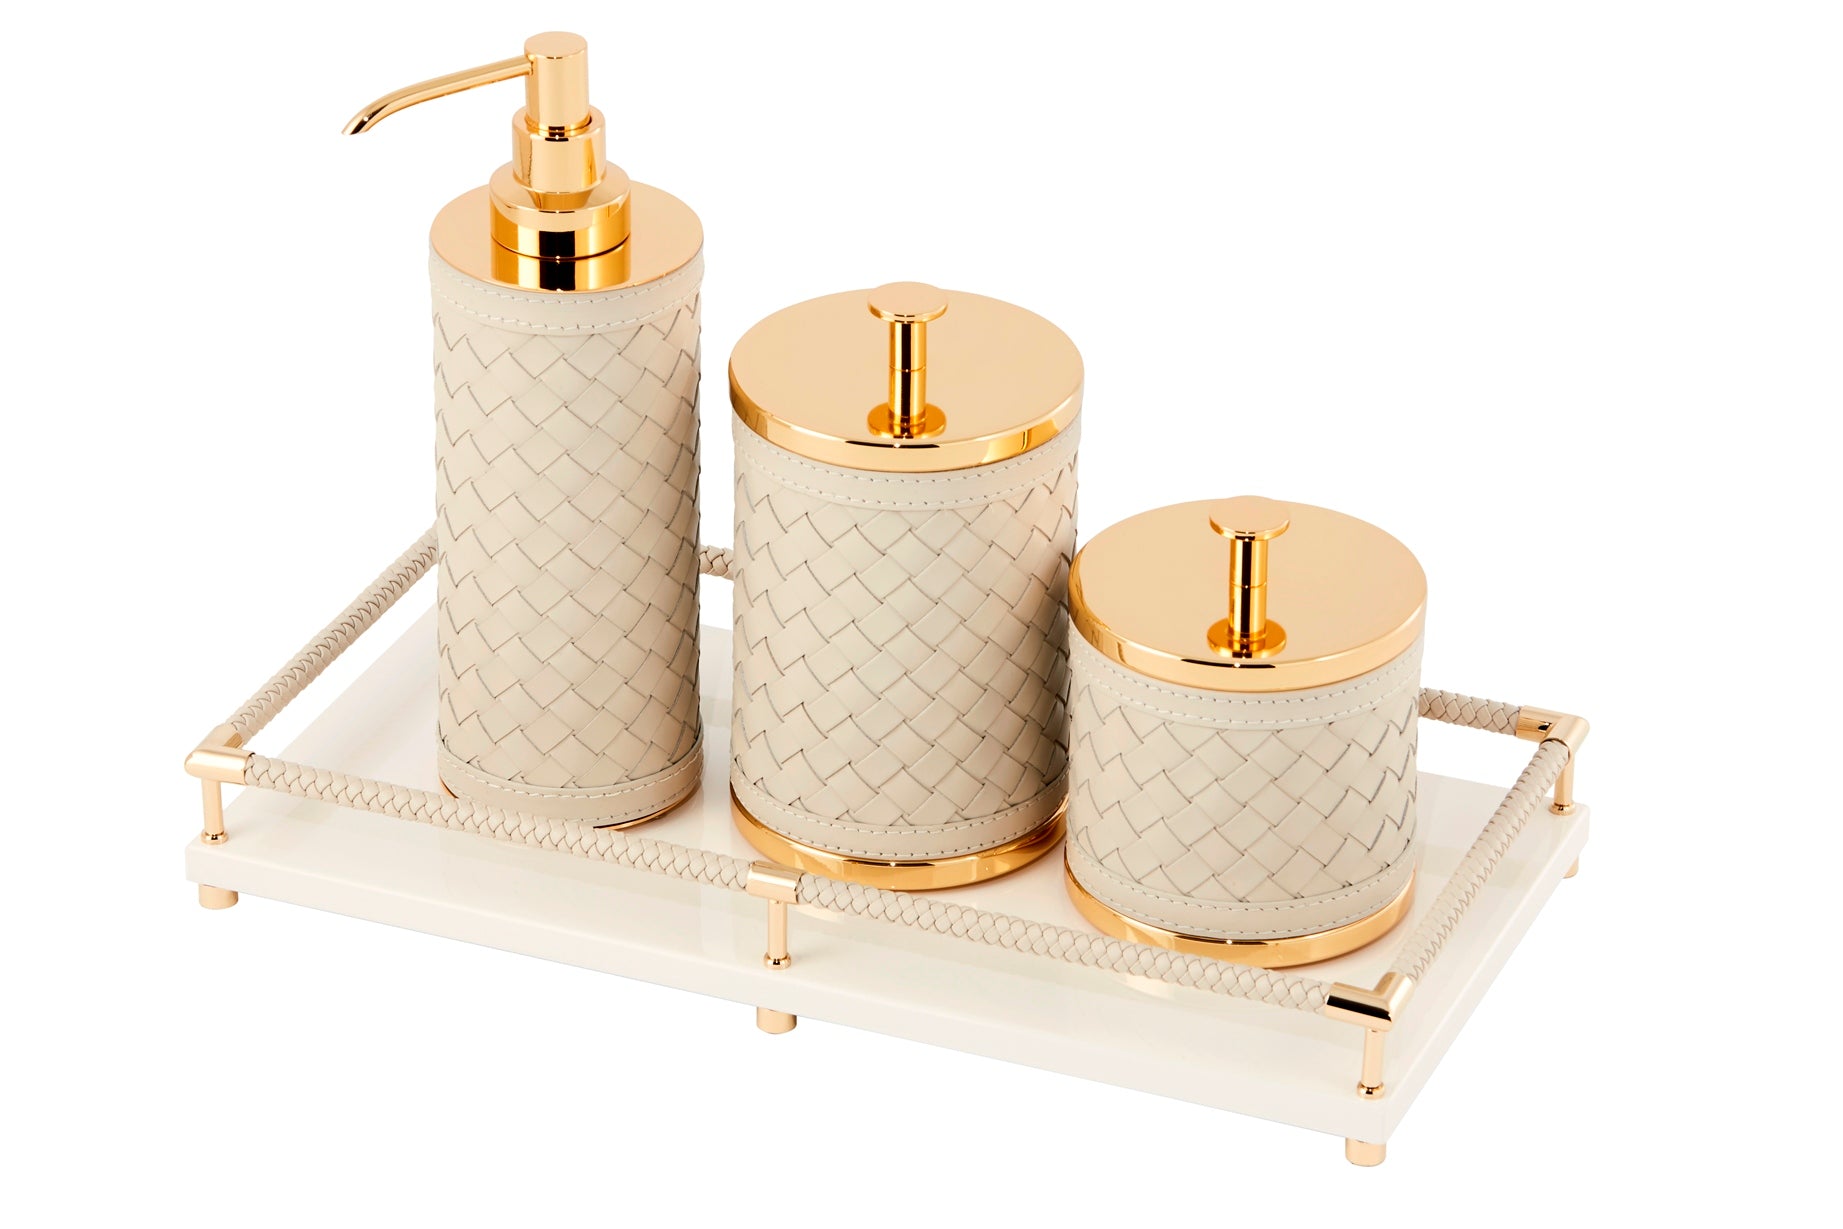 Riviere Alghero Handwoven Leather Box with Metal Finish | Covered with Handwoven Leather | Features Chrome or Gold Metal Finish | Perfect for Organizing and Elevating Your Bathroom Decor